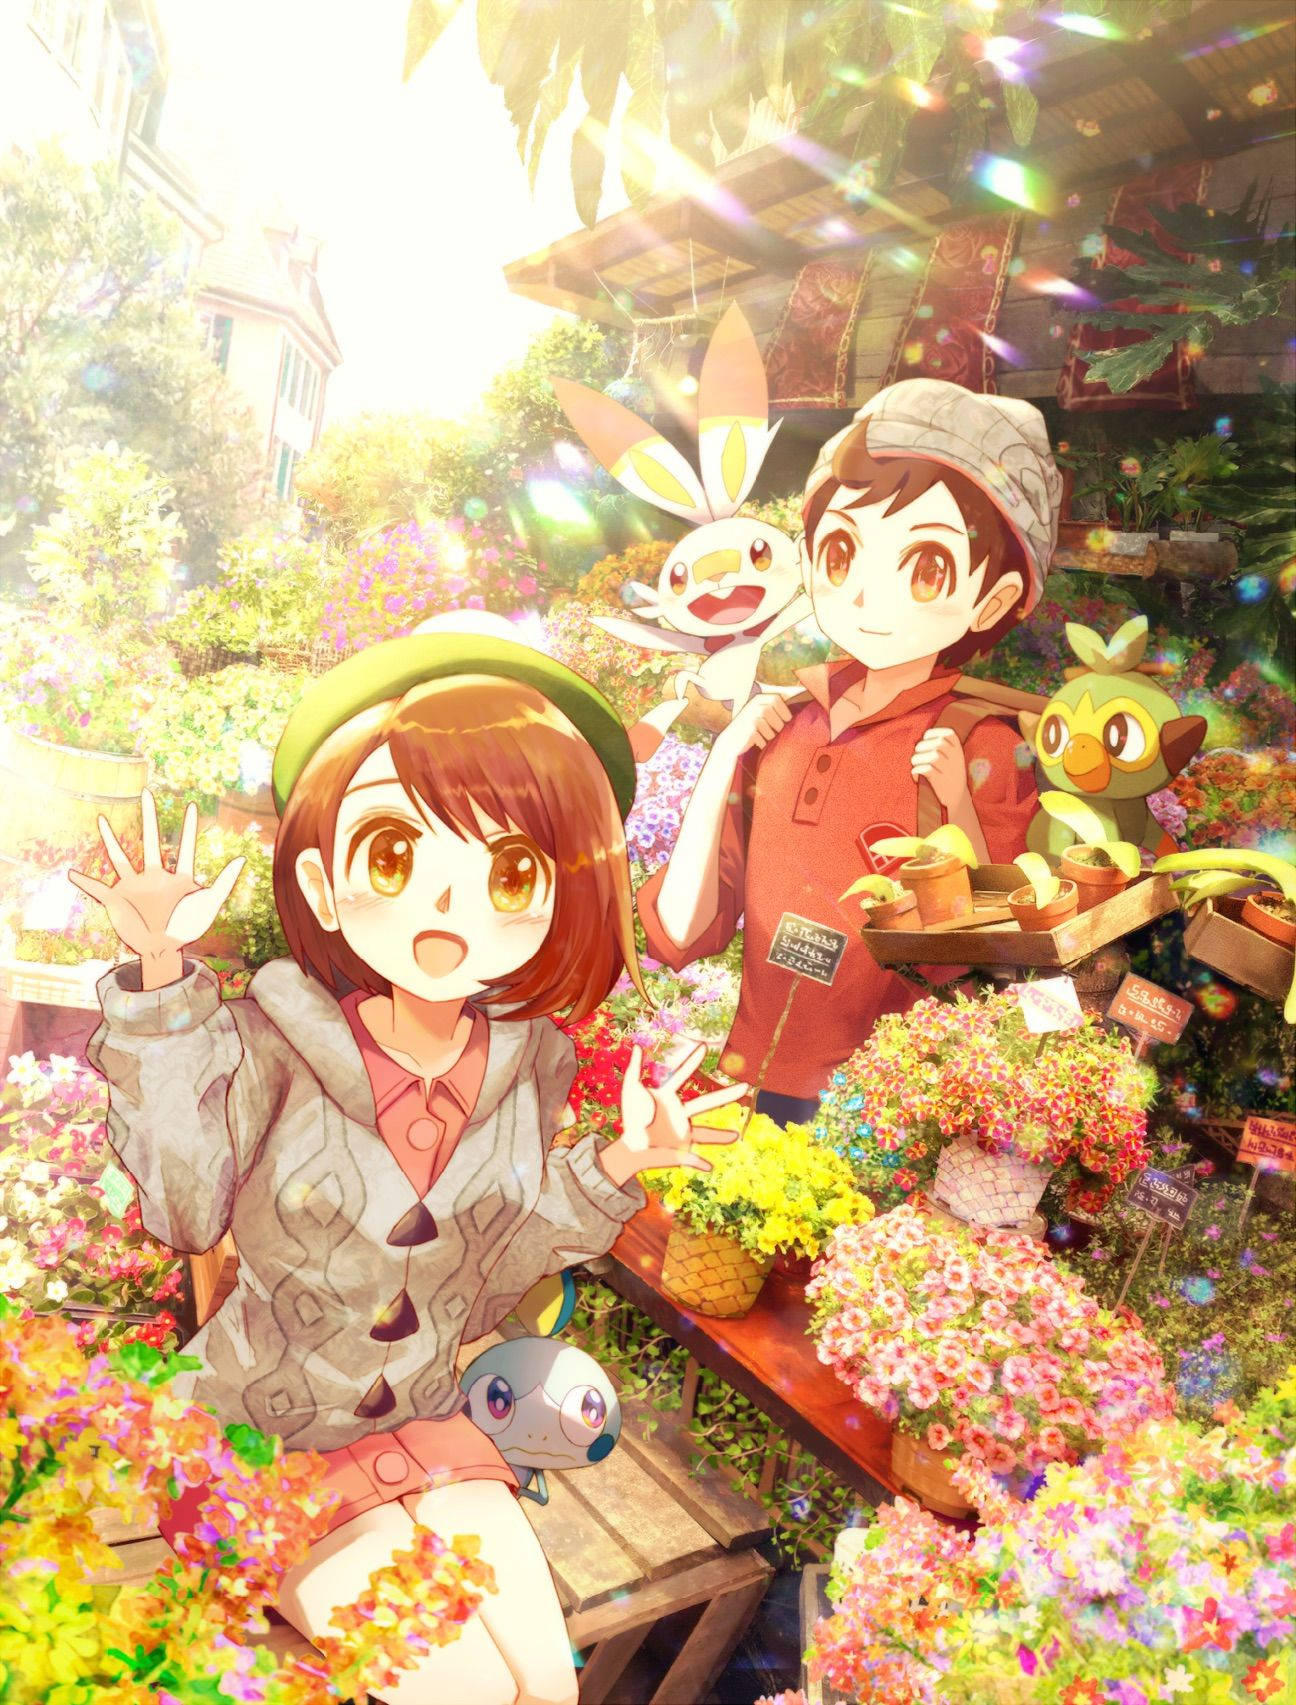 Gloria and Victor stand together in Pokemon Sword and Shield Wallpaper